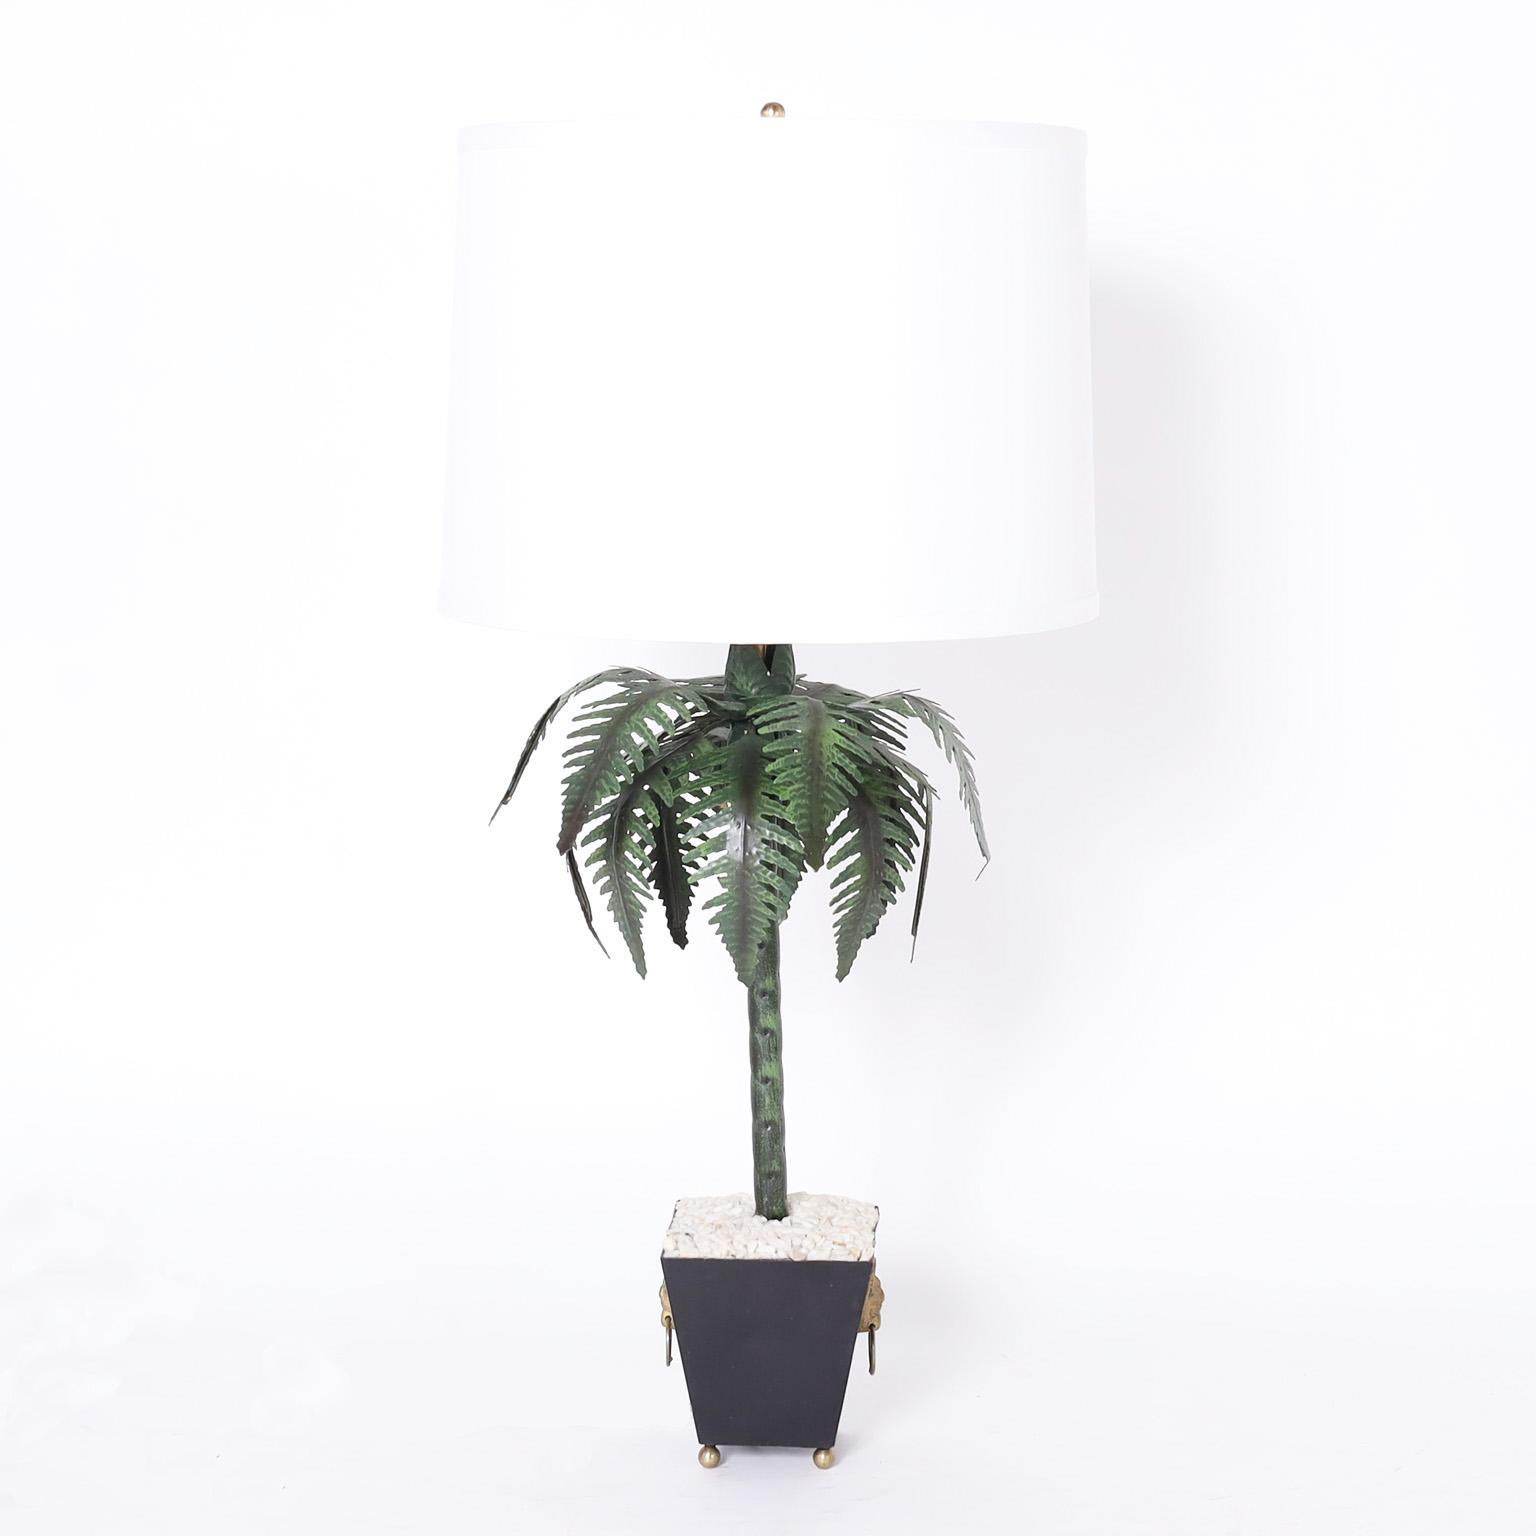 Chic pair of neoclassic style Italian tole table lamps with stylized palm trees in planters toped with white rocks, brass lion heads, and ball feet.